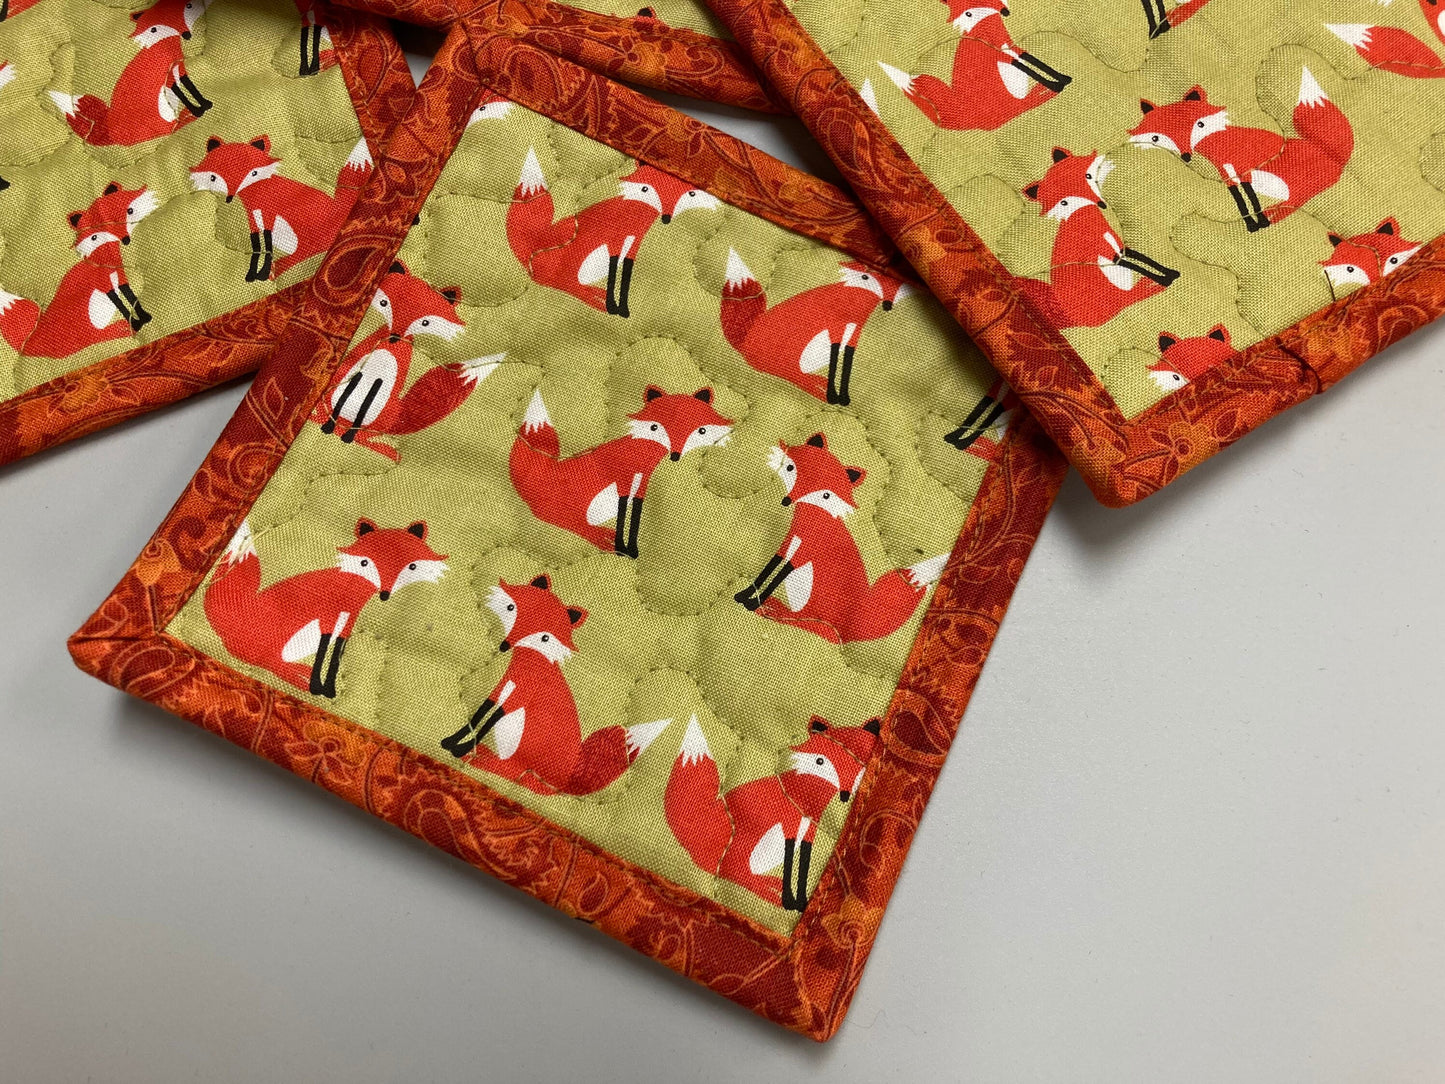 Fox Woodland Animal Fabric Coasters for Drinks, 5x5" Large Coffee Tea Beer Hot Cold Washable Reusable Kid’s Snack Mats Orange Green